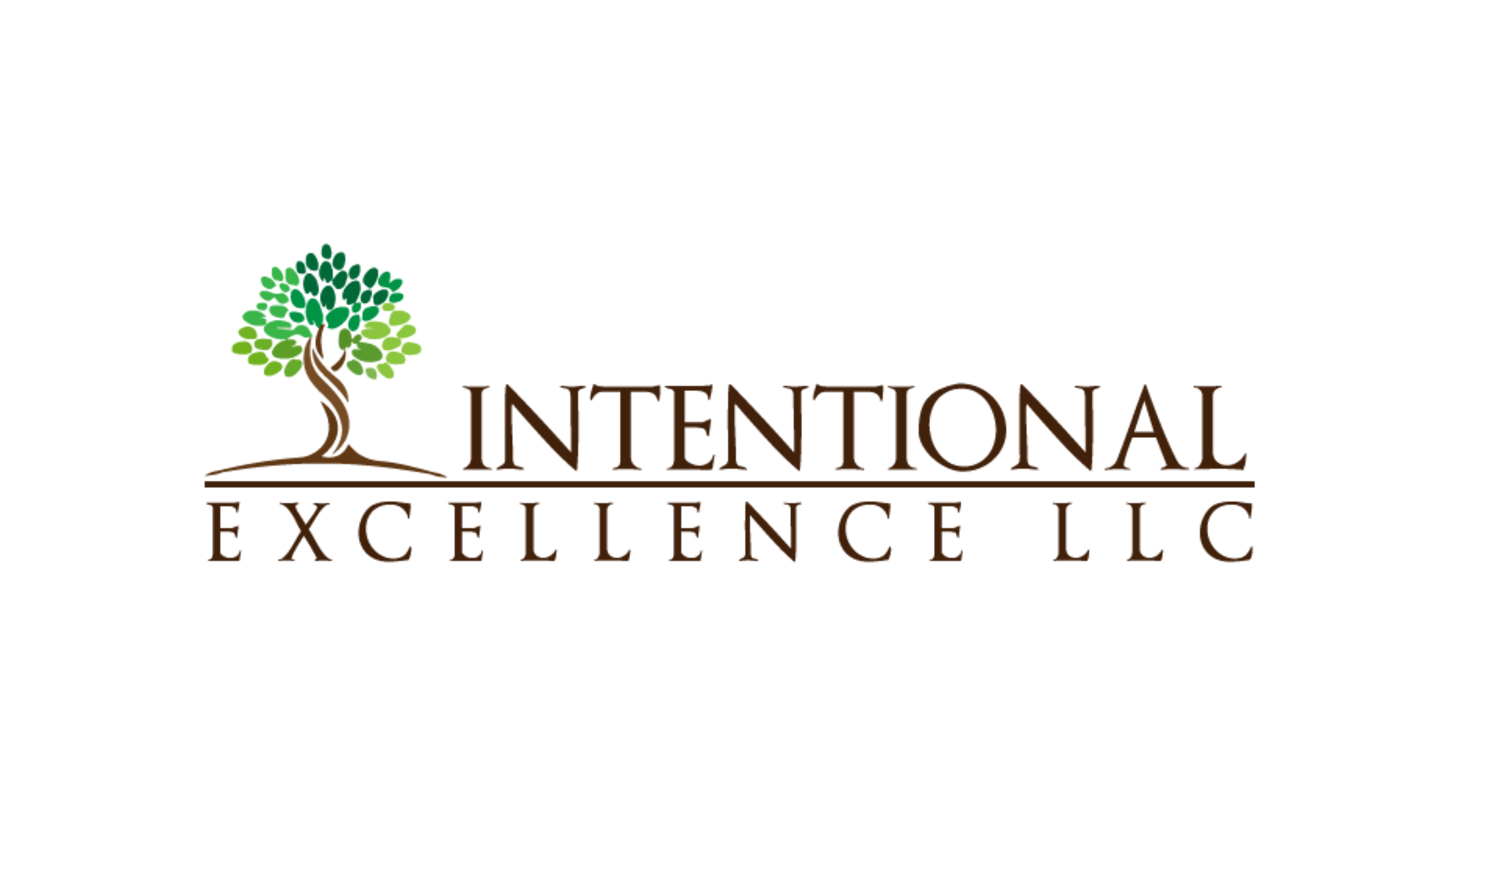 Intentional excellence